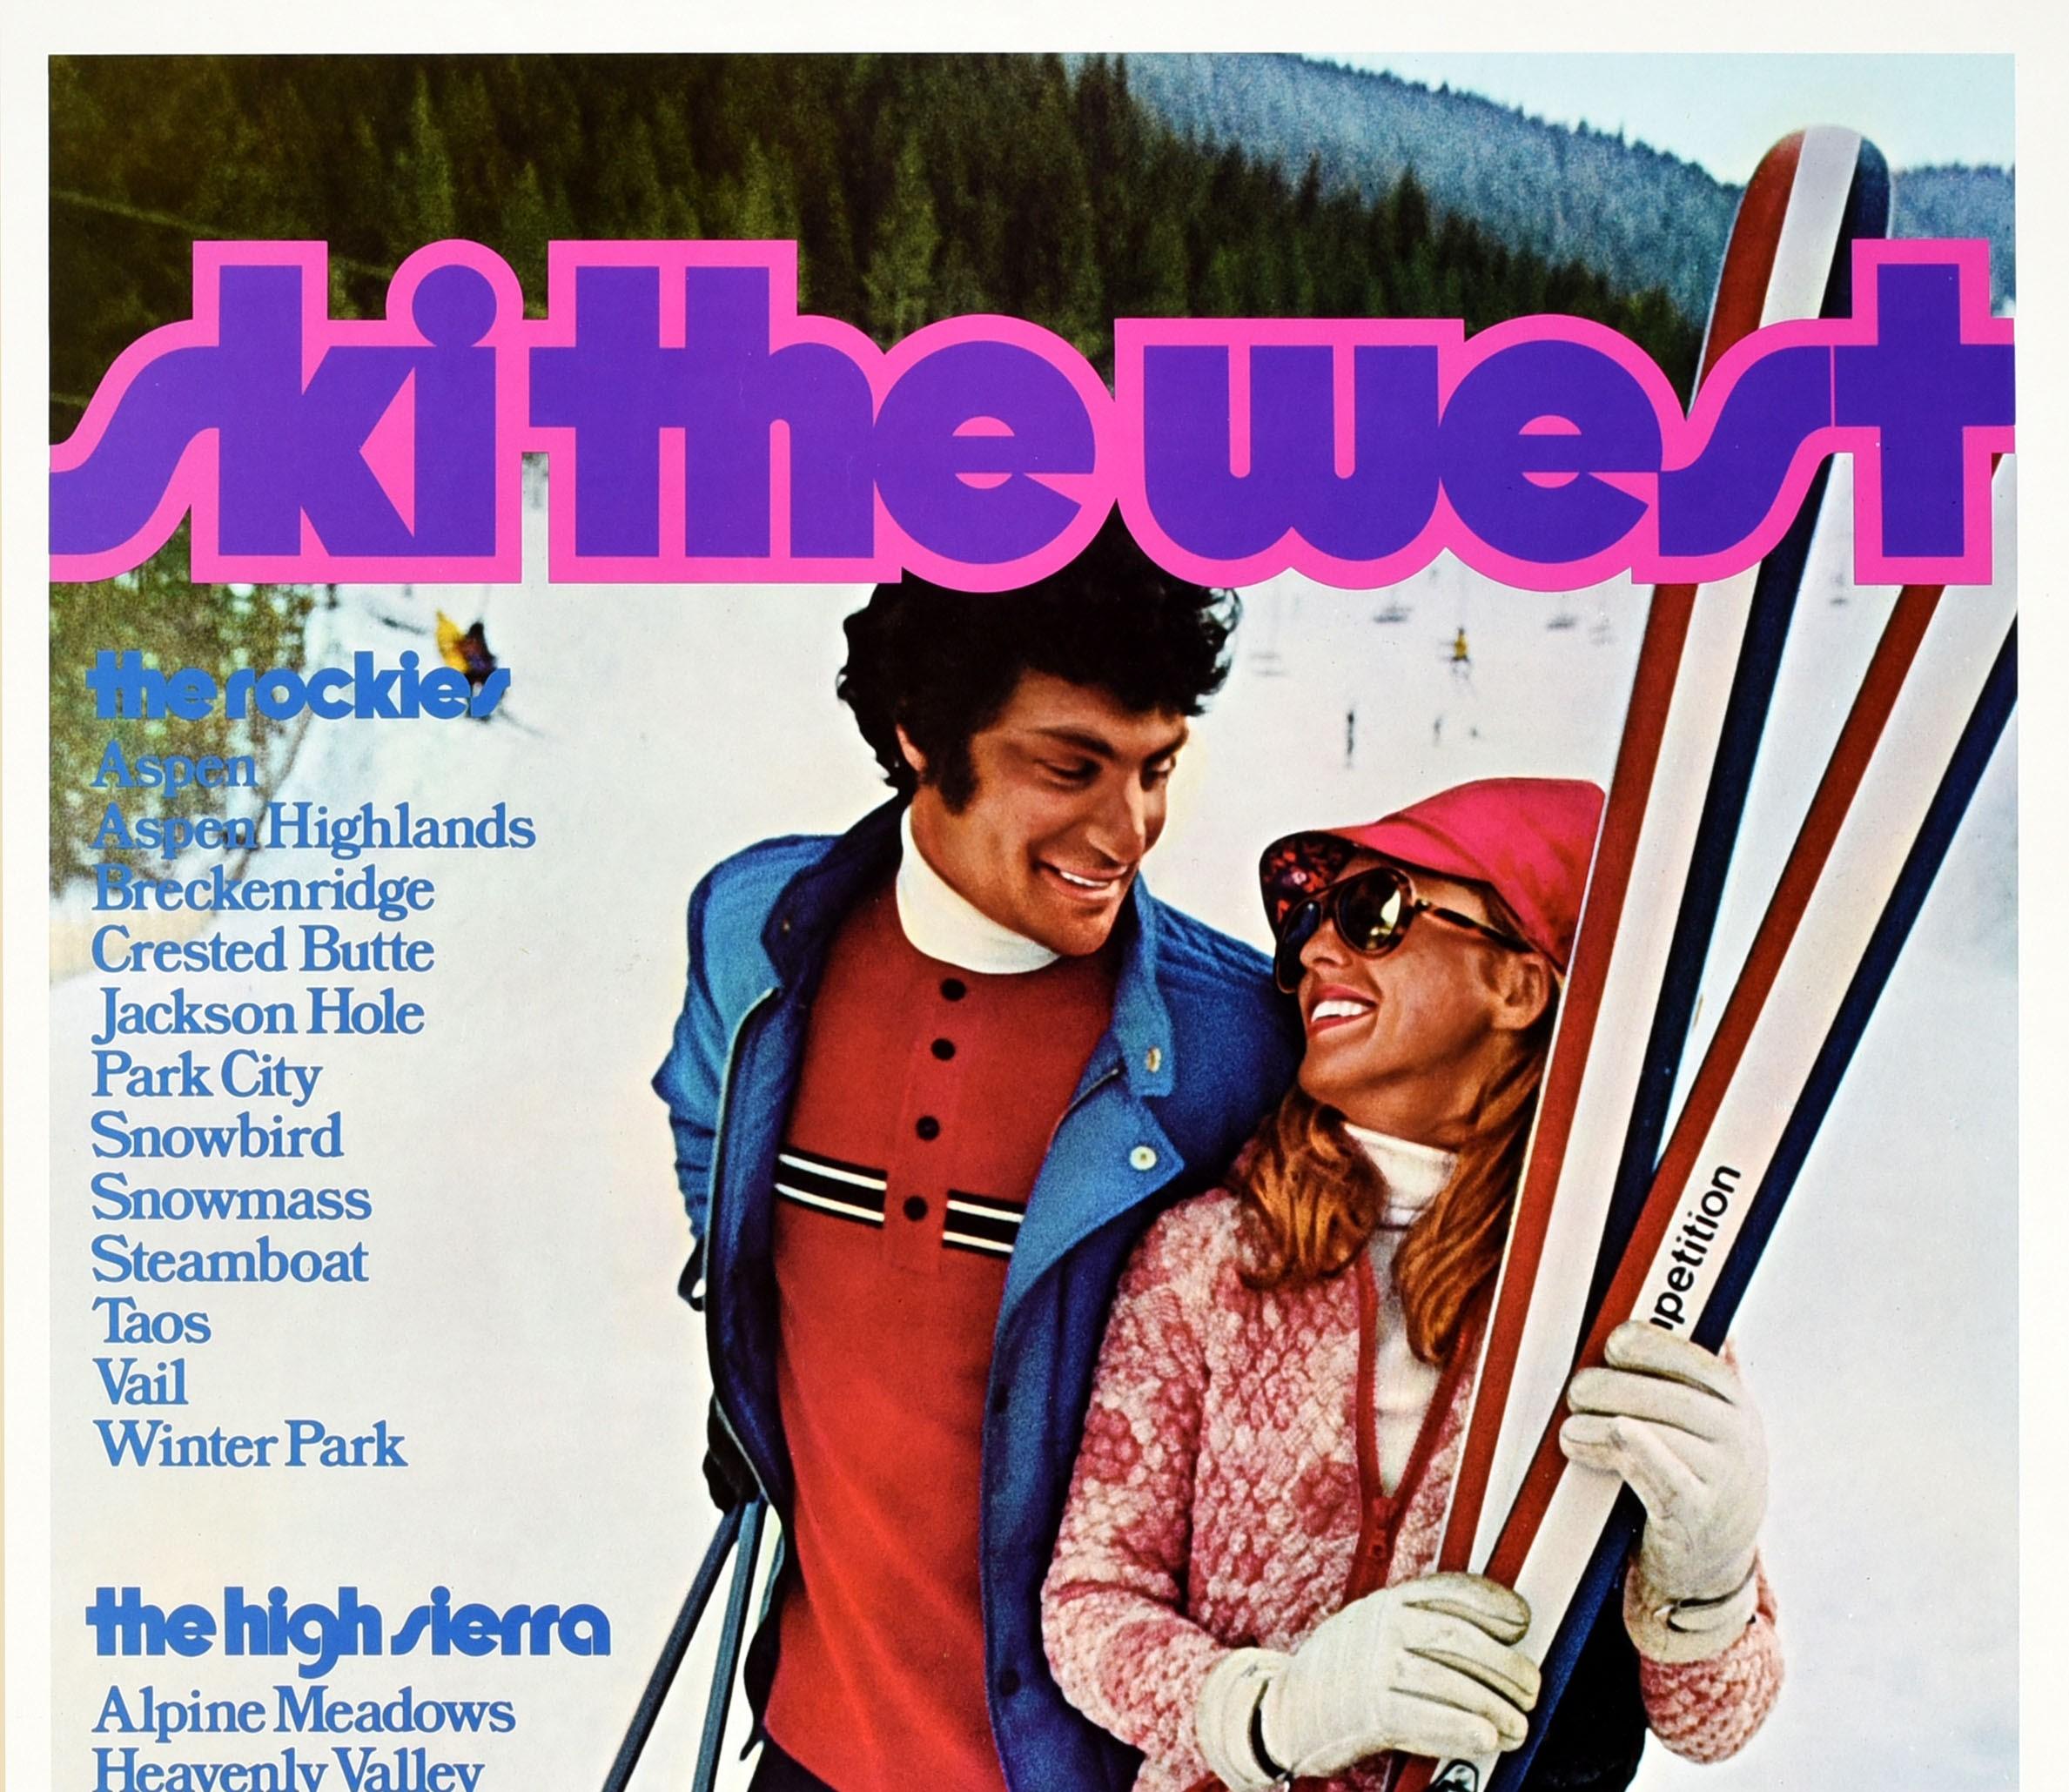 Original vintage winter sport skiing travel poster - Ski The West United Air Lines - featuring a photo of a smiling couple standing in the snow in front of trees and mountains, the lady holding a pair of skis and the man leaning on the poles, the